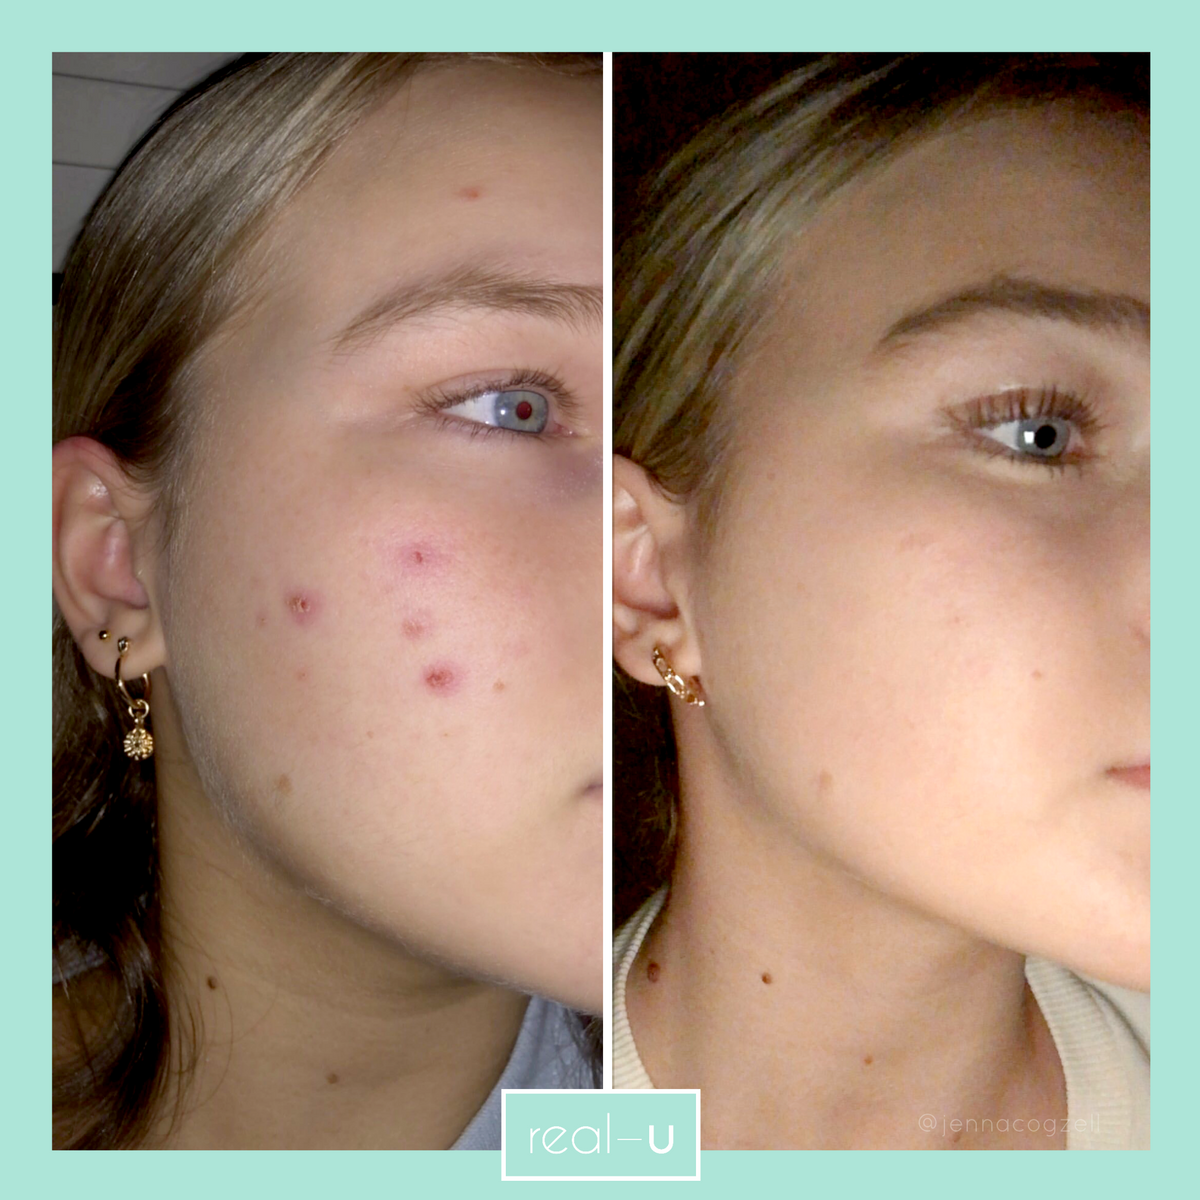 real-u acne skincare before and after results